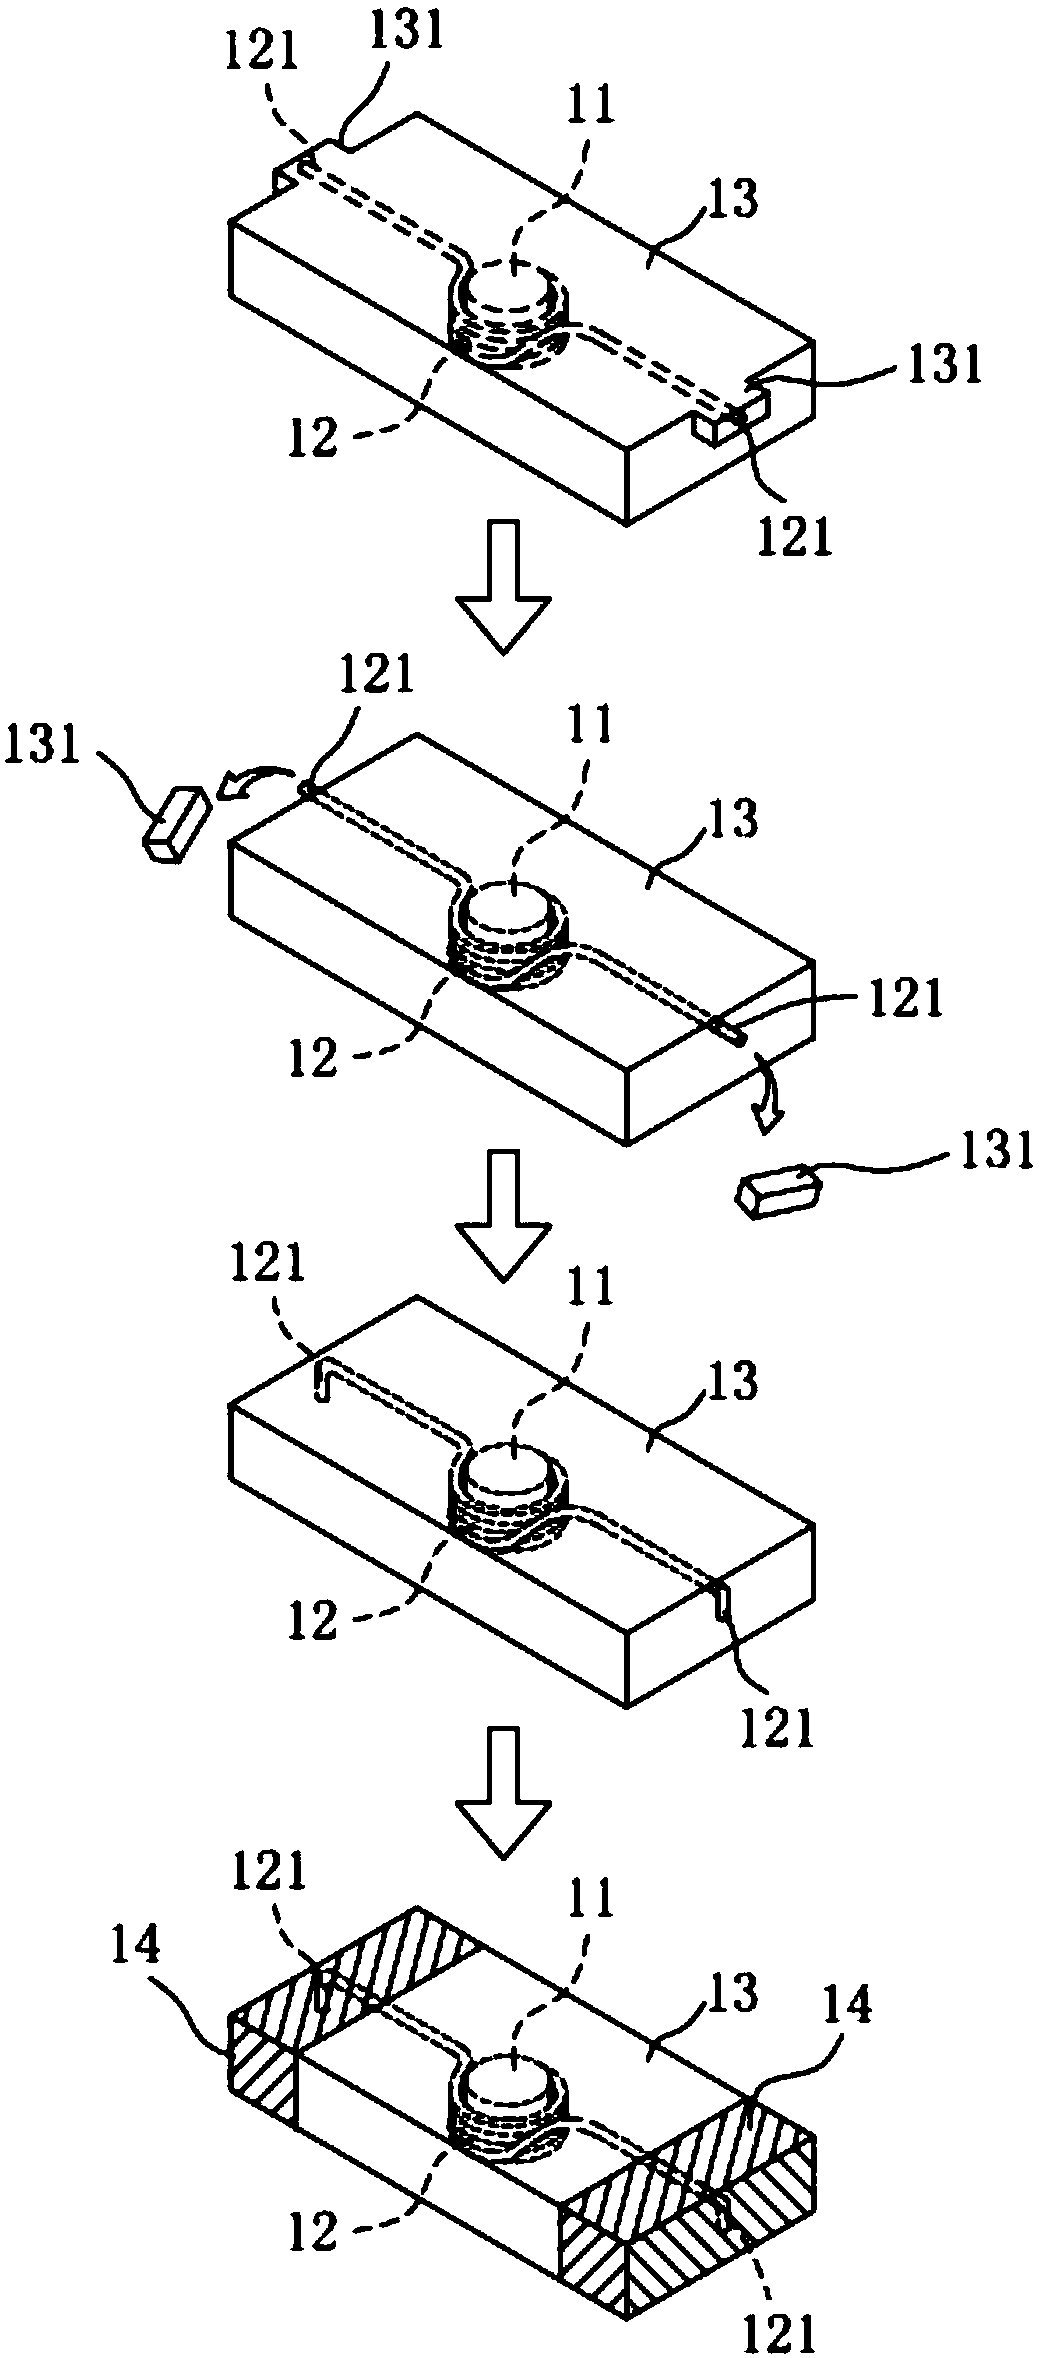 A method for making an inductor and the product made therefrom